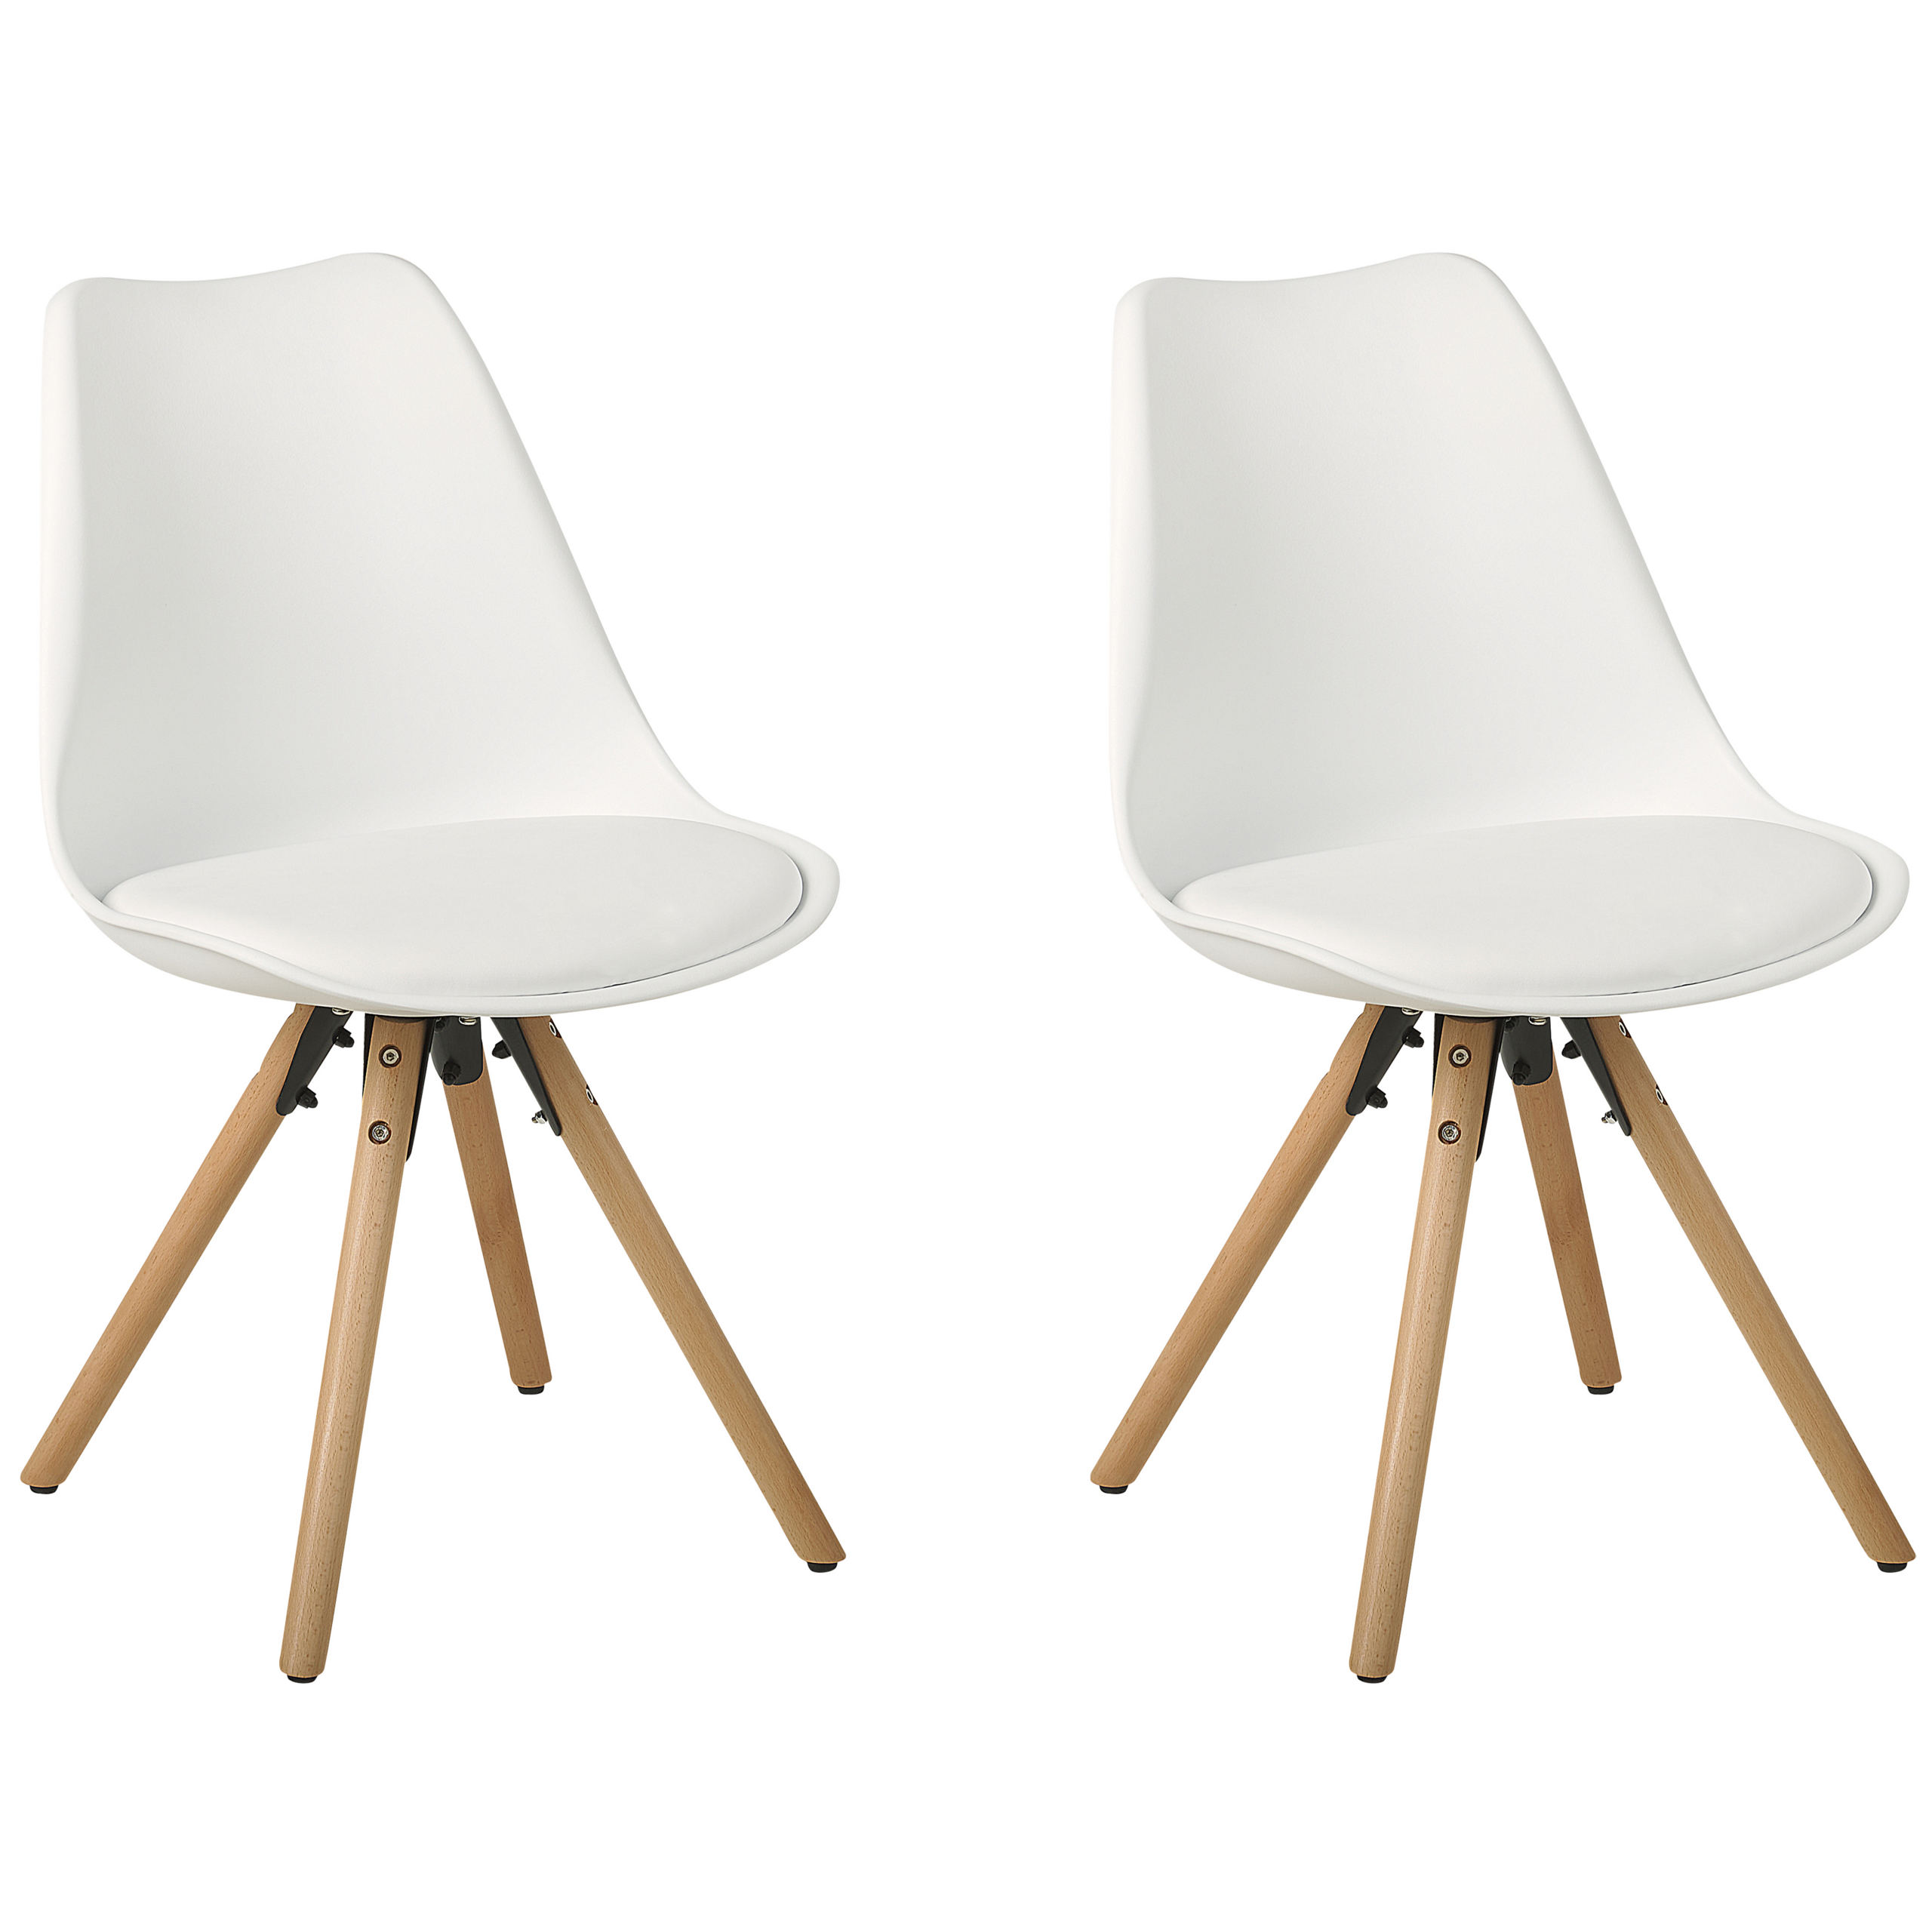 Beliani Set of 2 Dining Chairs White Faux Leather Seat Sleek Wooden Legs